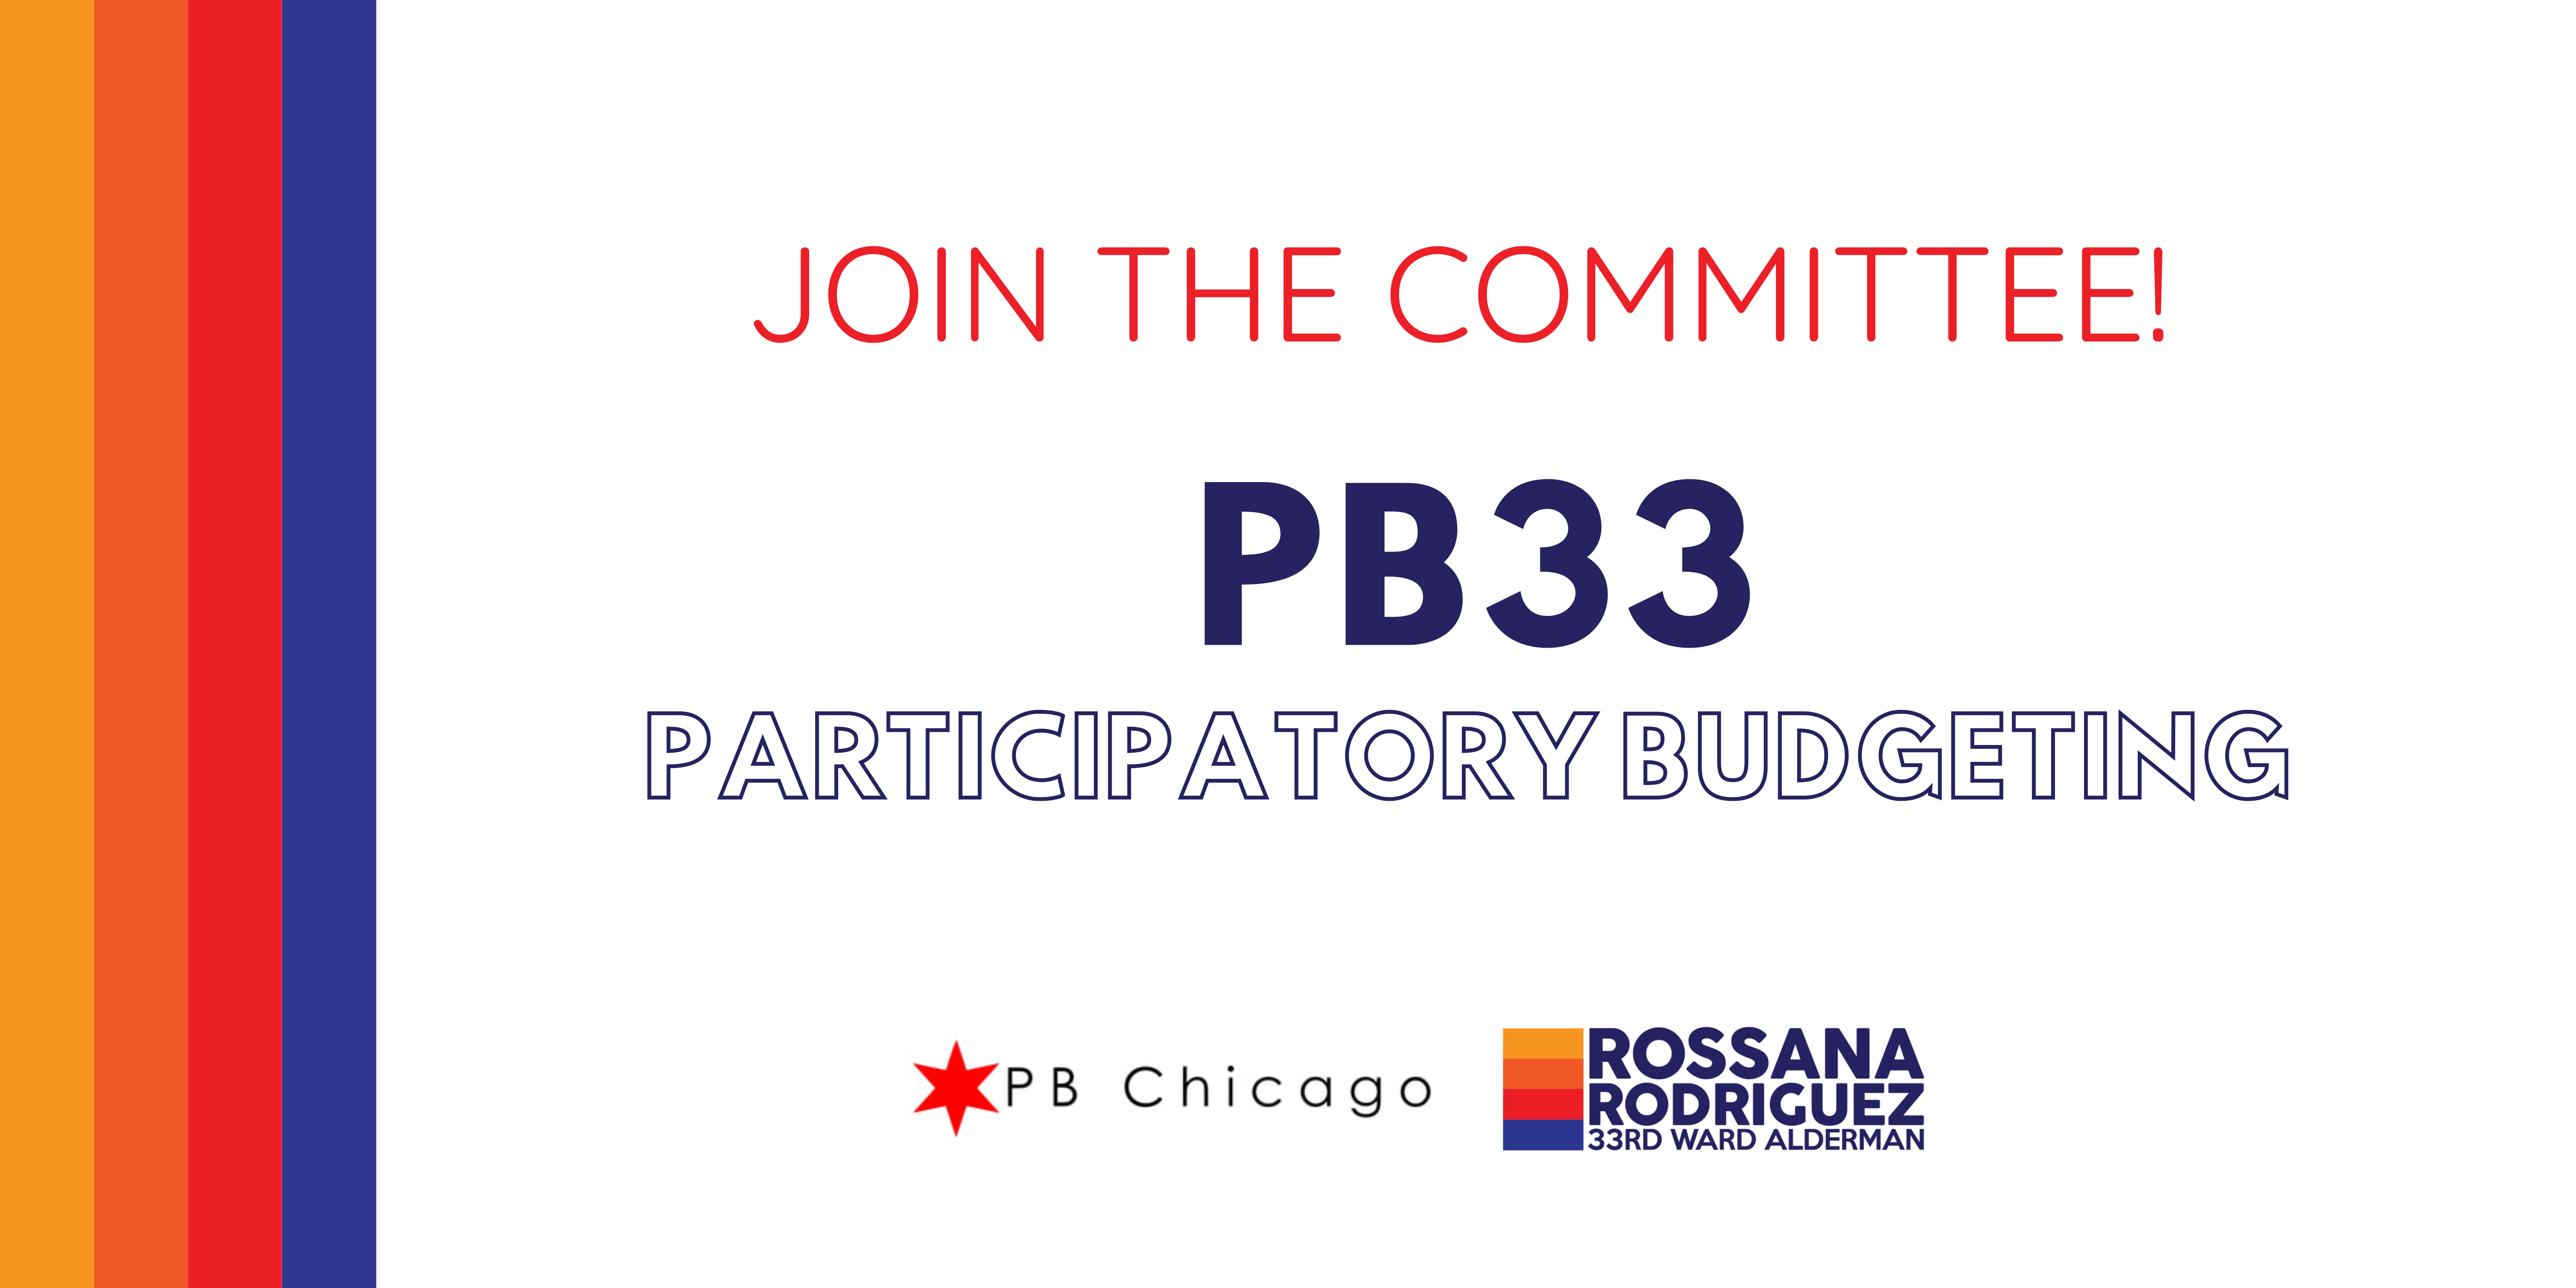 Join the Participatory Budgeting Committee